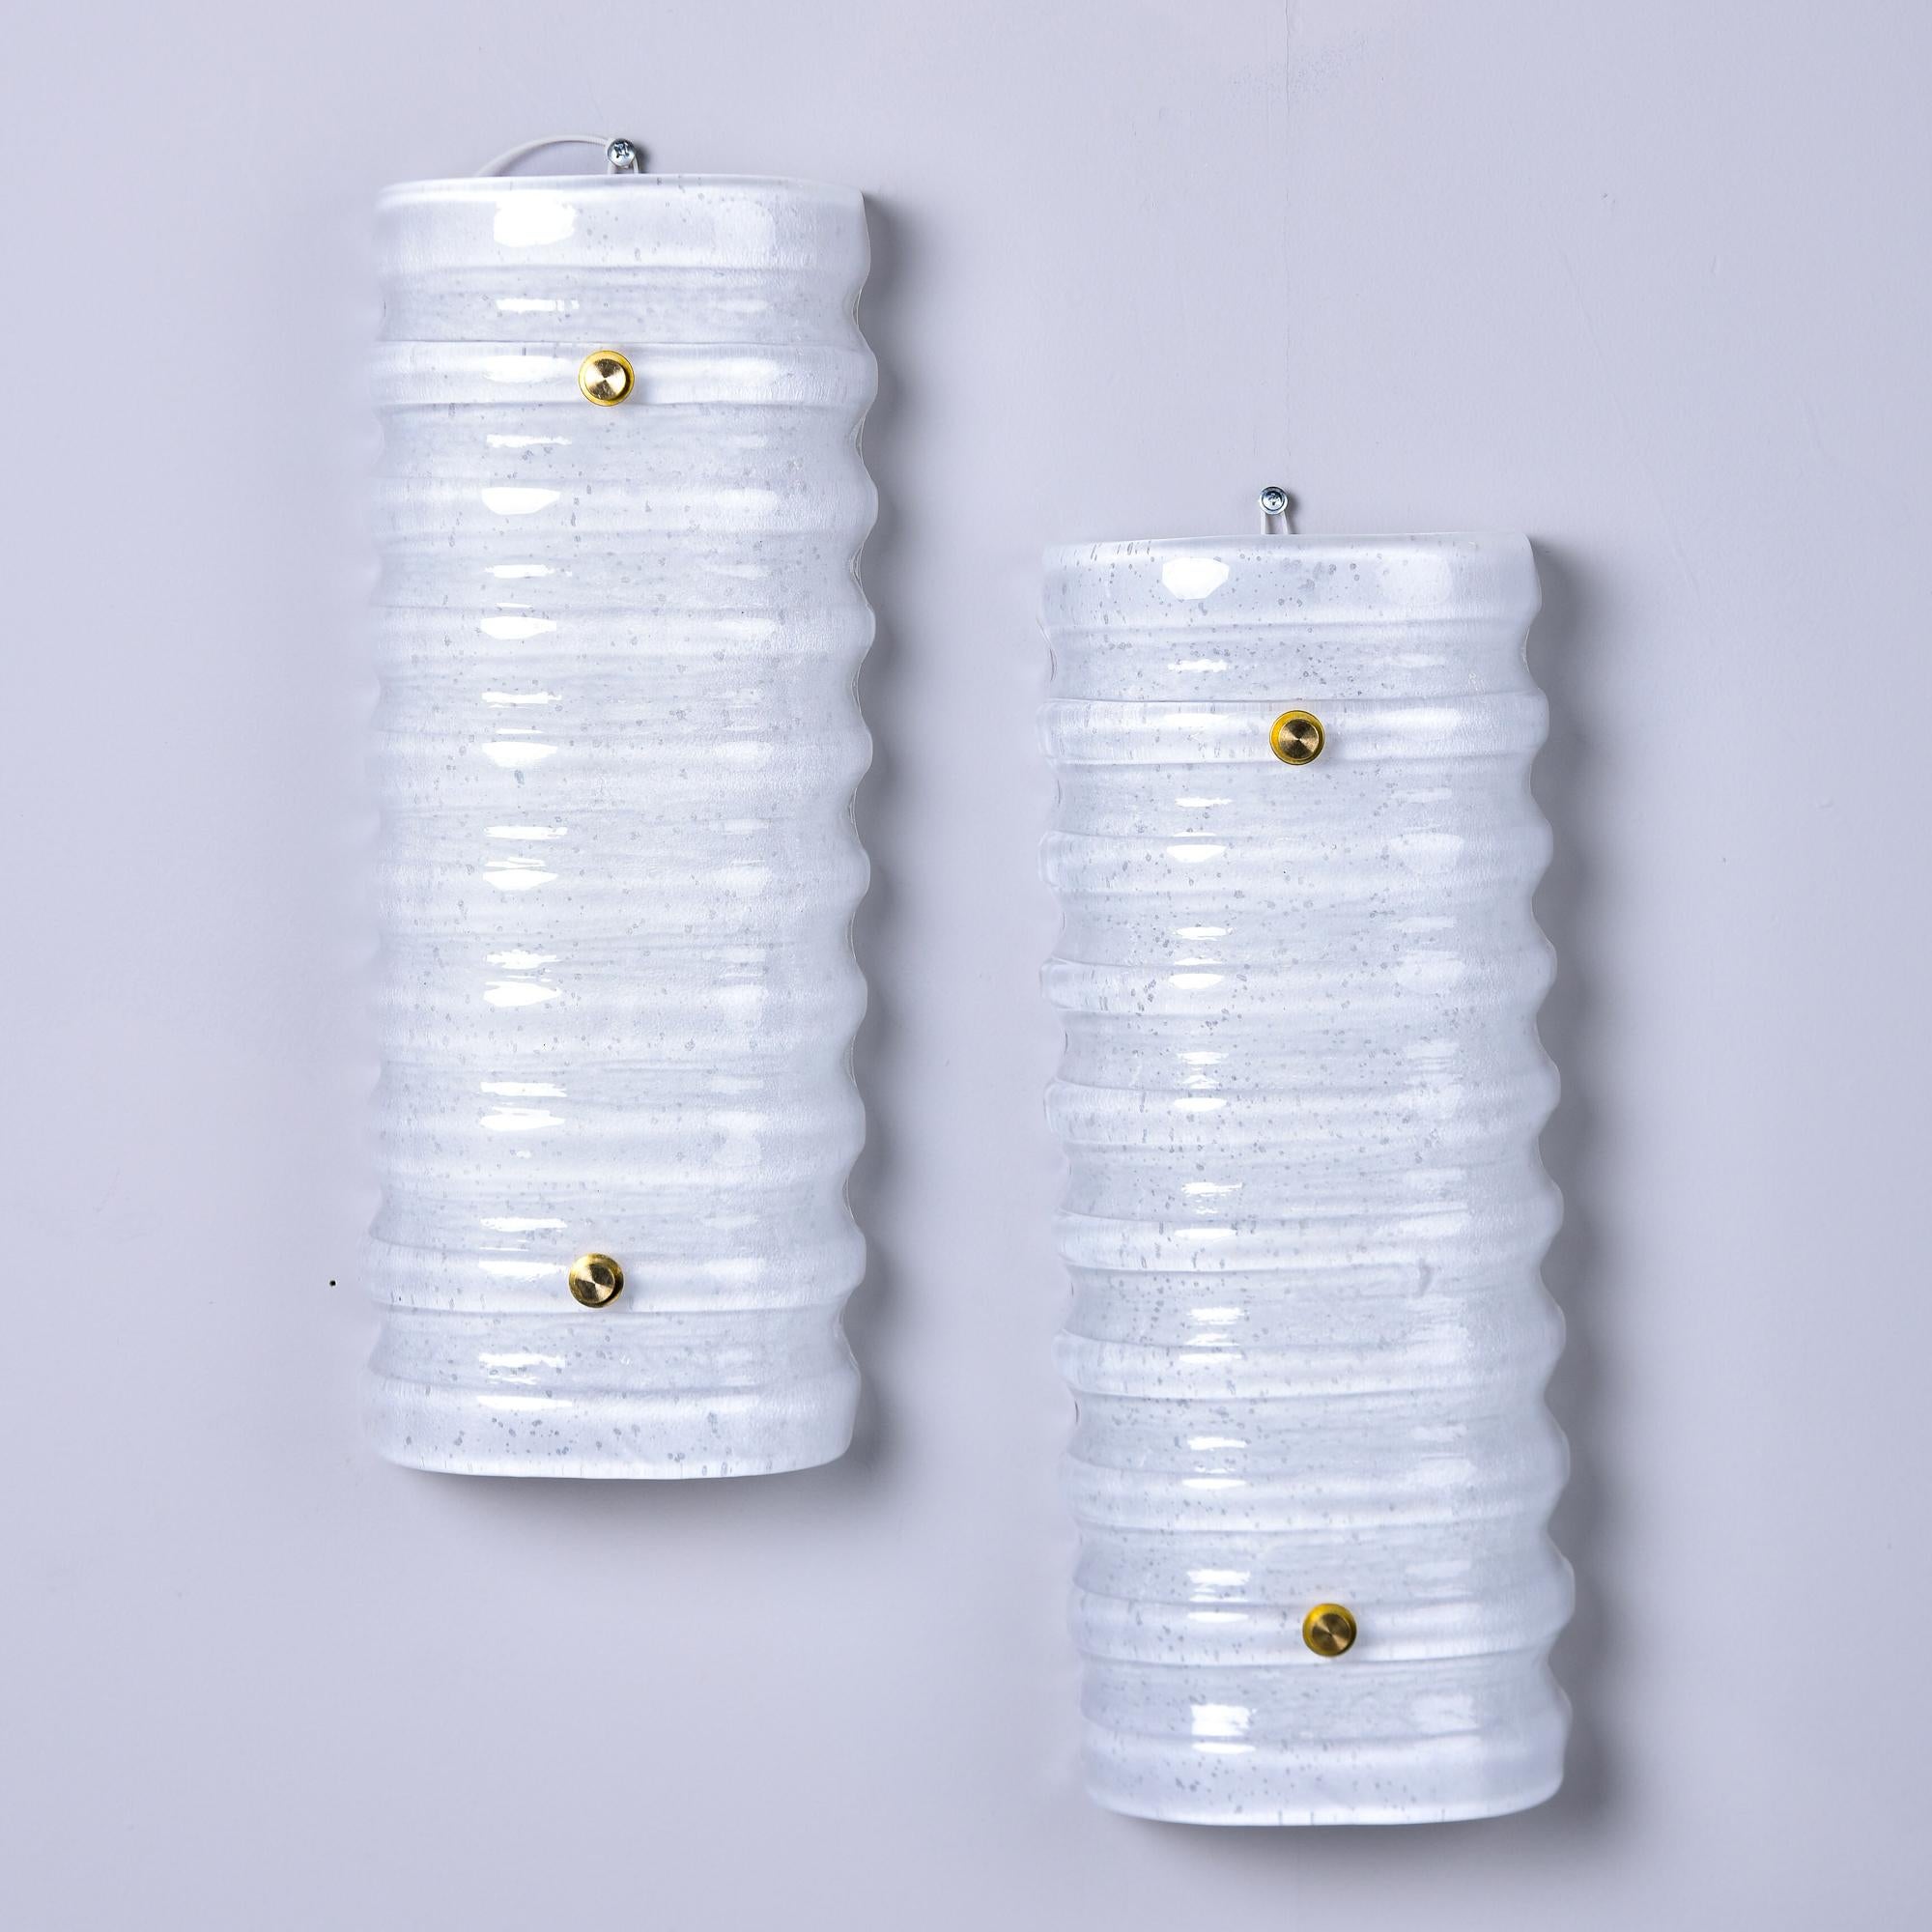 New and made in Italy, this pair of sconces feature Murano glass shades in opaque white with a ribbed texture. Brass hardware and two light sockets behind each shade. Sold and priced as a pair. Unknown Murano glass maker. 

New wiring for US